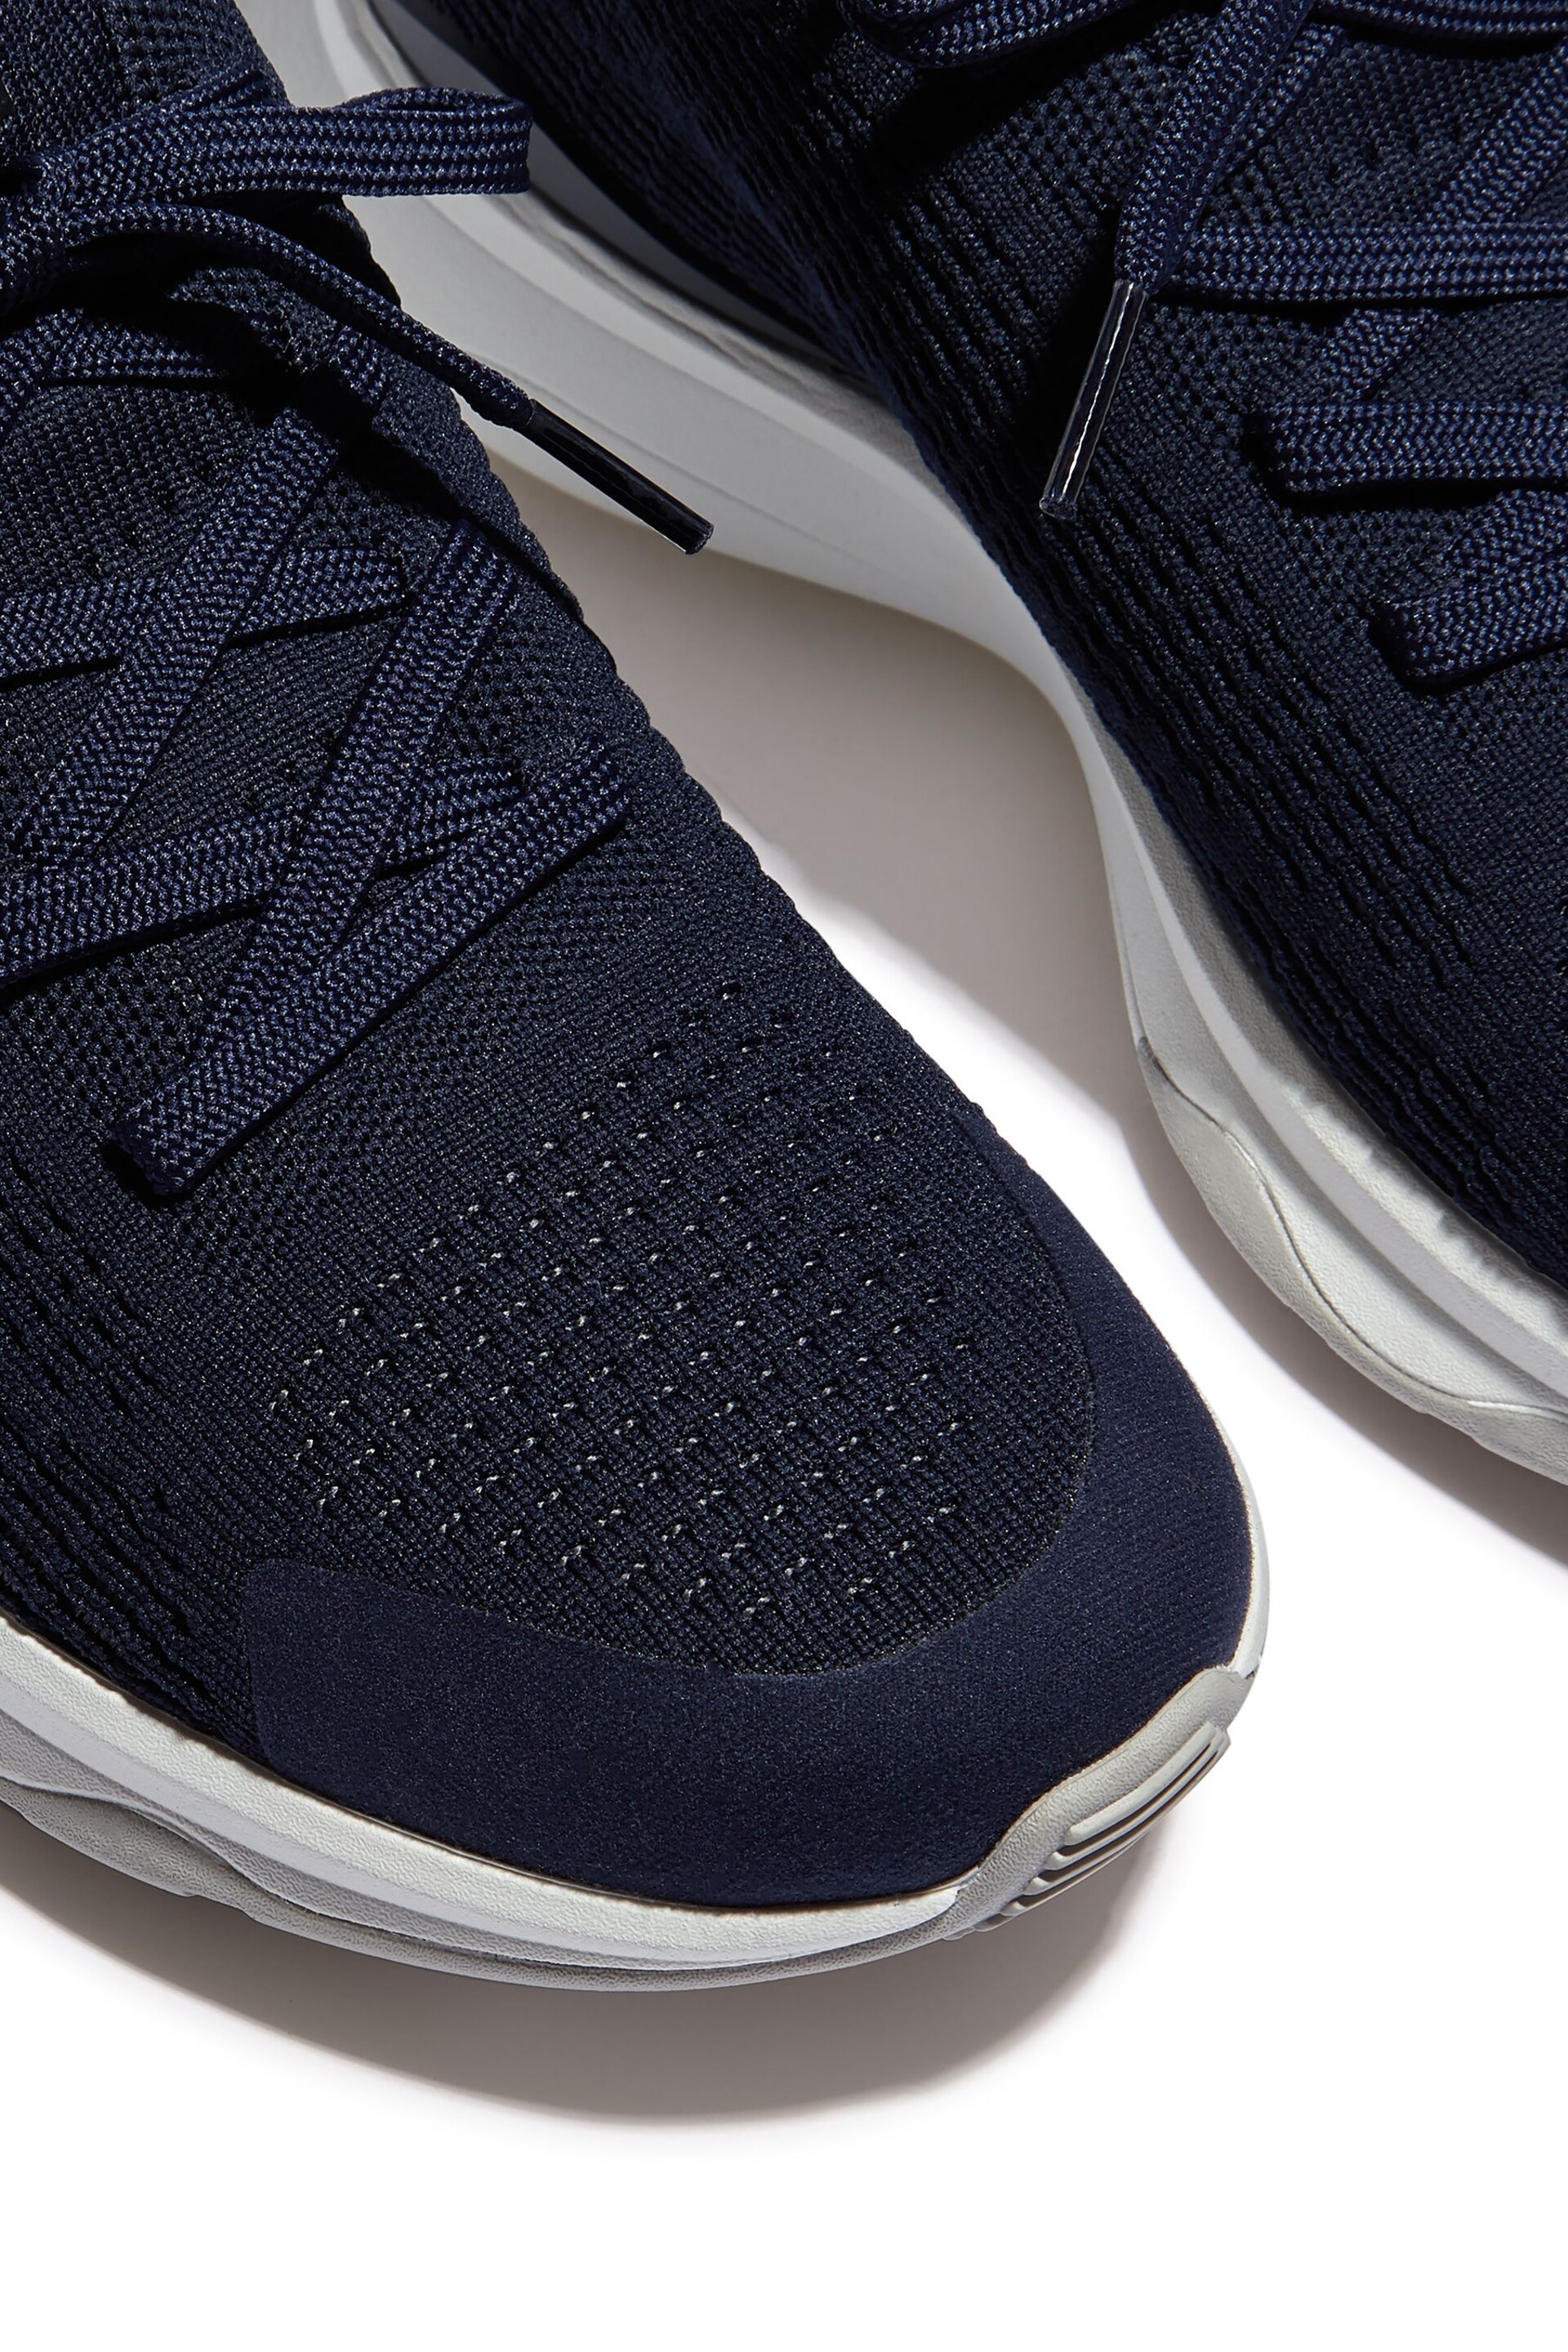 FitFlop Blue Vitamin Ffx Knit Sports Sneakers - Image 4 of 4